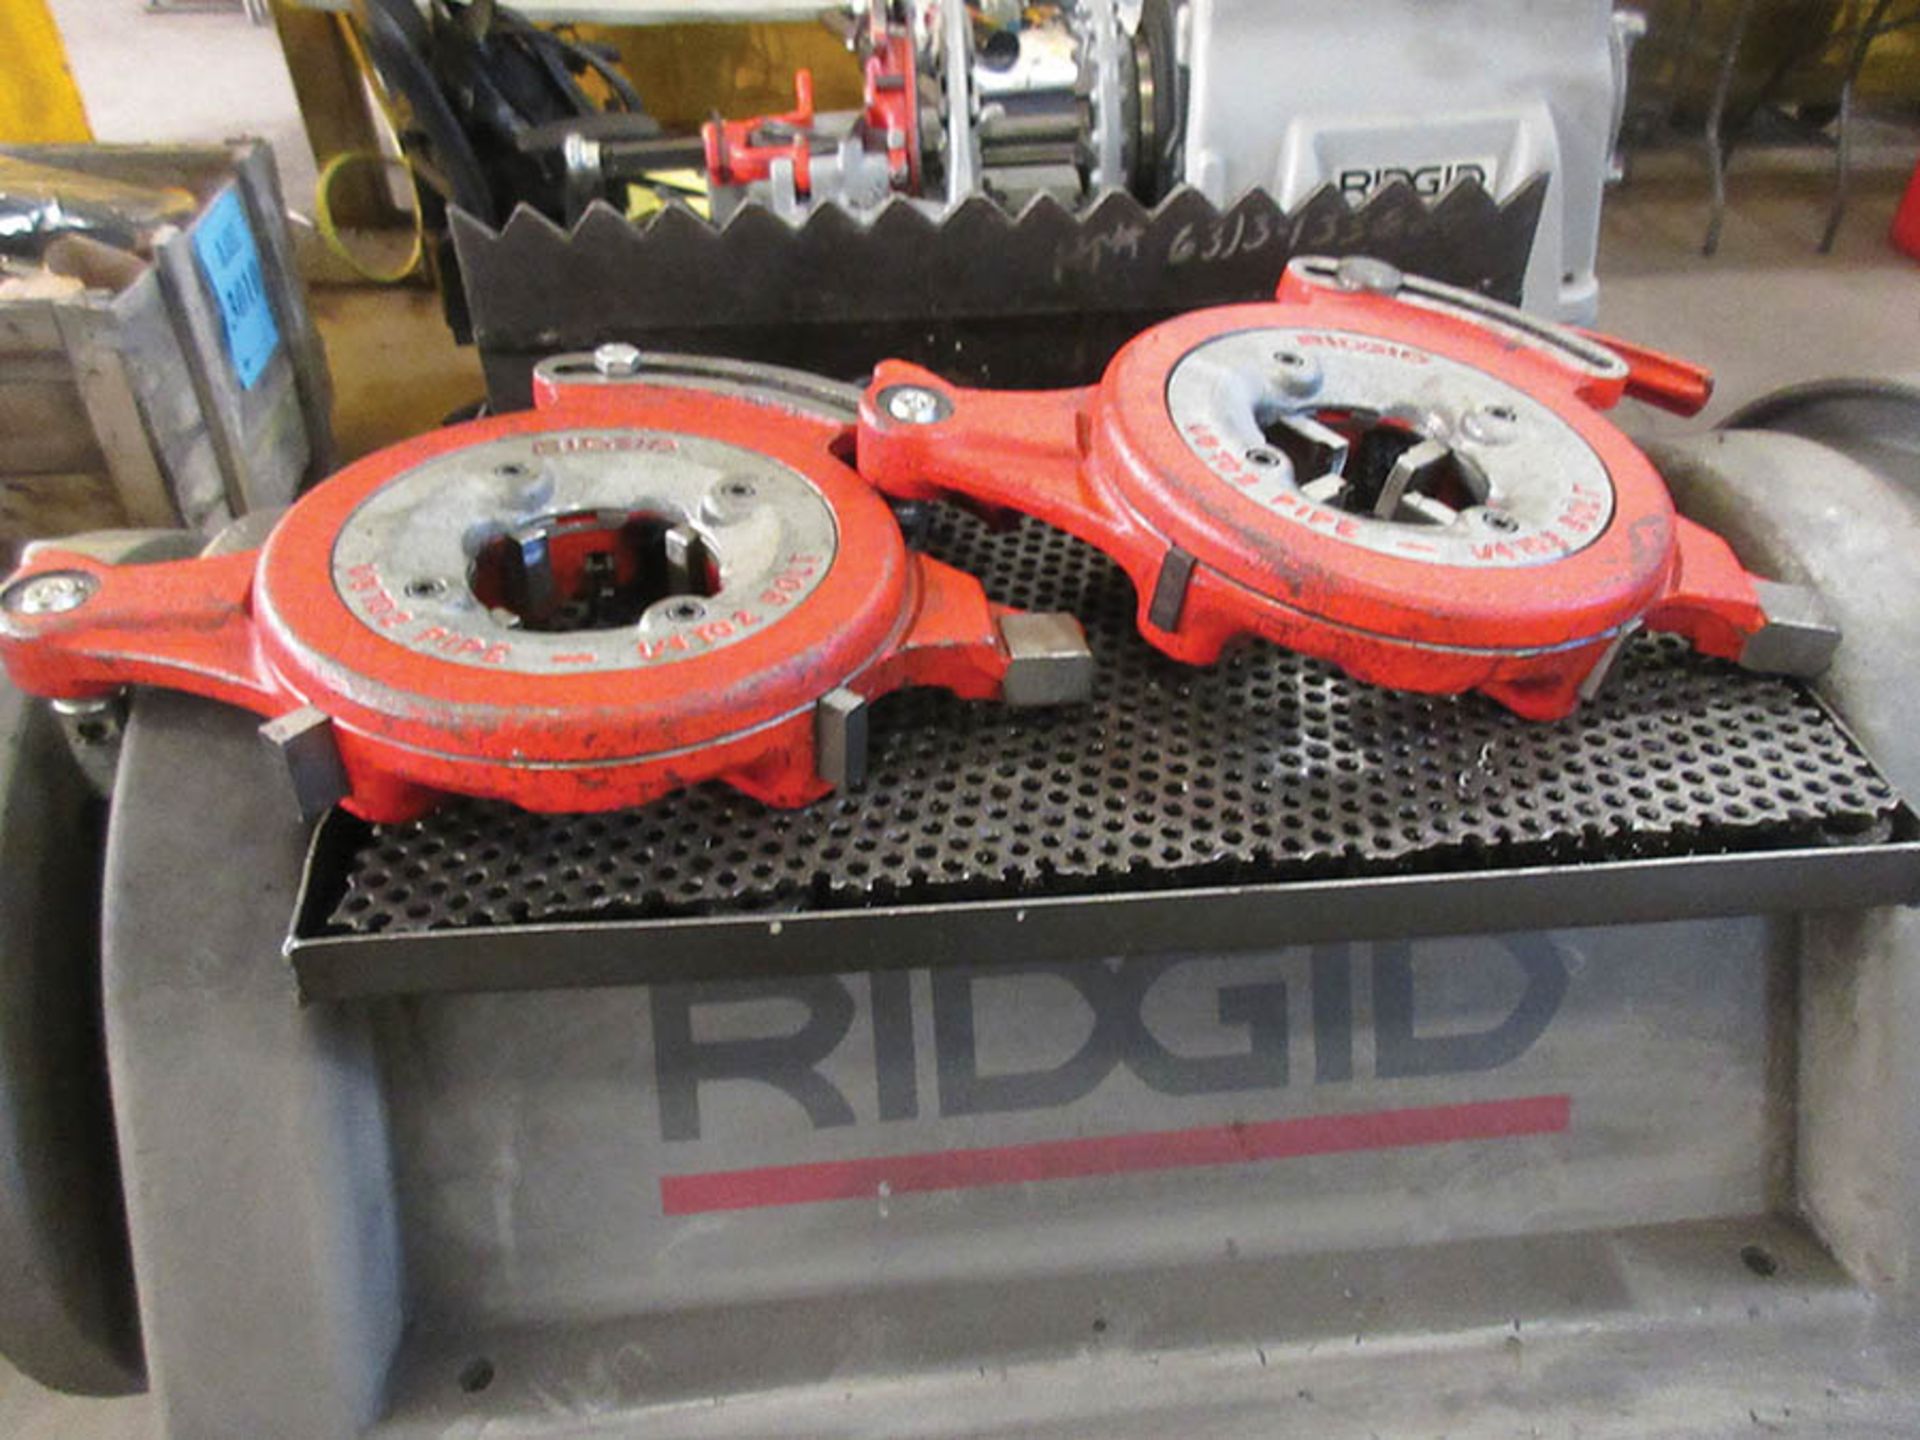 RIDGID 1224 PIPE THREADING MACHINE WITH STAND, PLUS (QTY.2) 1/8'' - 2'' DIE HEADS, AND (QTY.1) 2 1/2 - Image 4 of 4